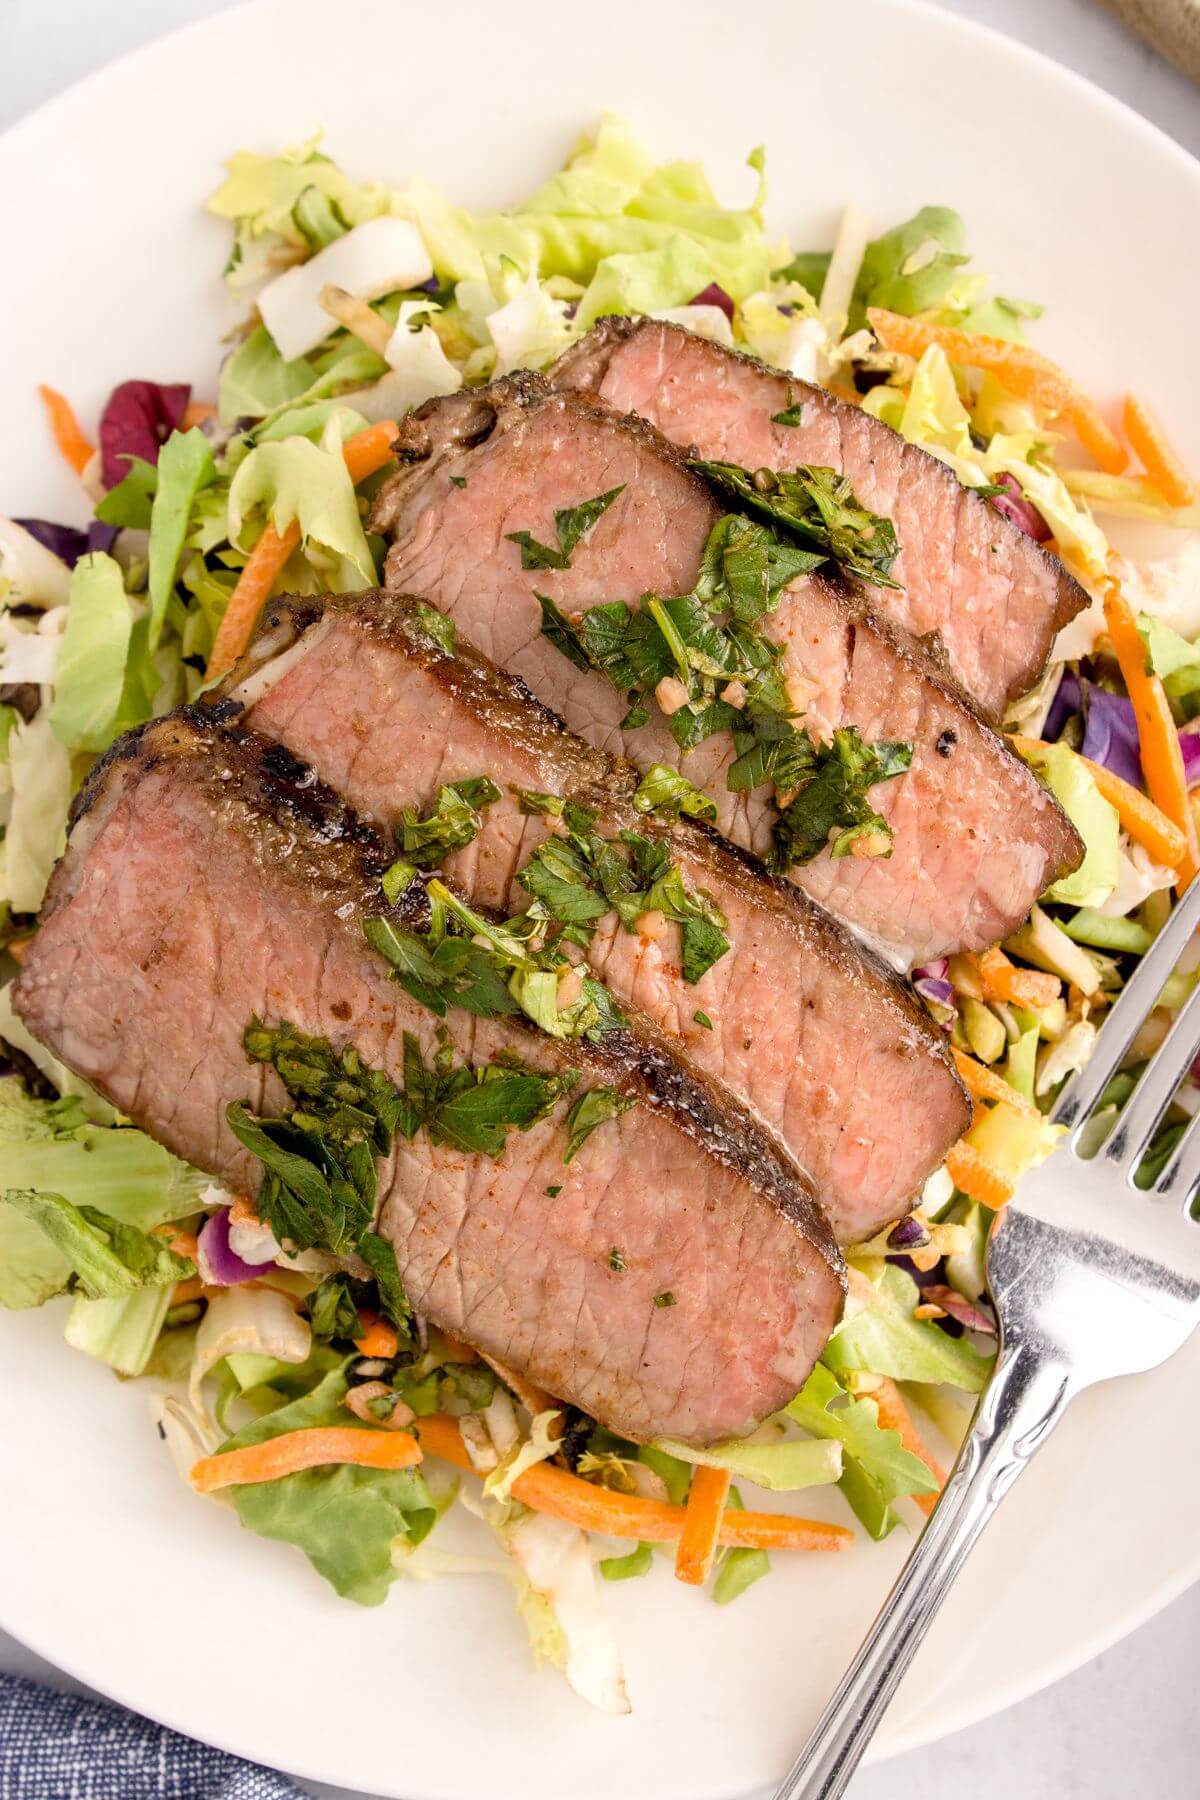 Meat slices are centered on plate over salad.